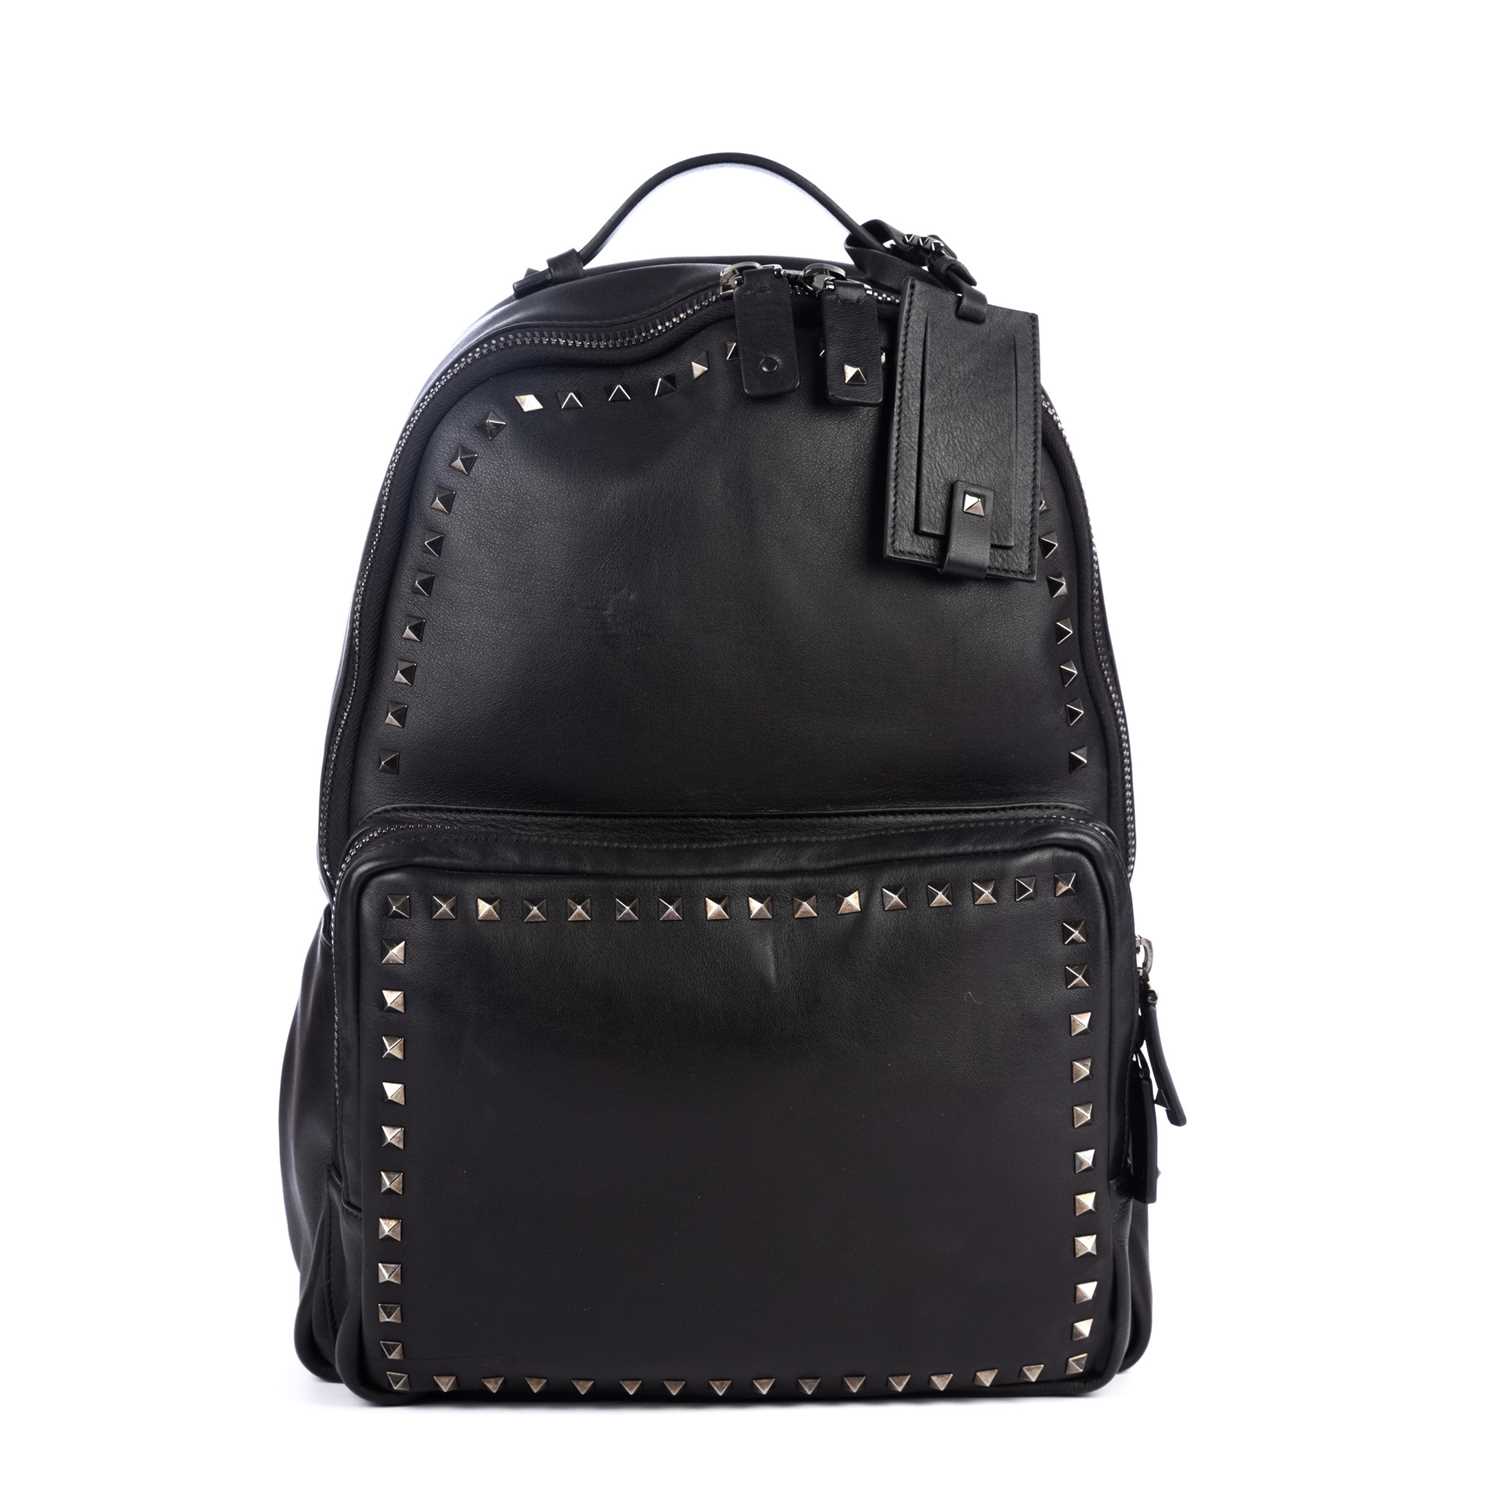 Valentino, a Rockstud backpack, crafted from smooth black leather, featuring a pyramid studded trim,